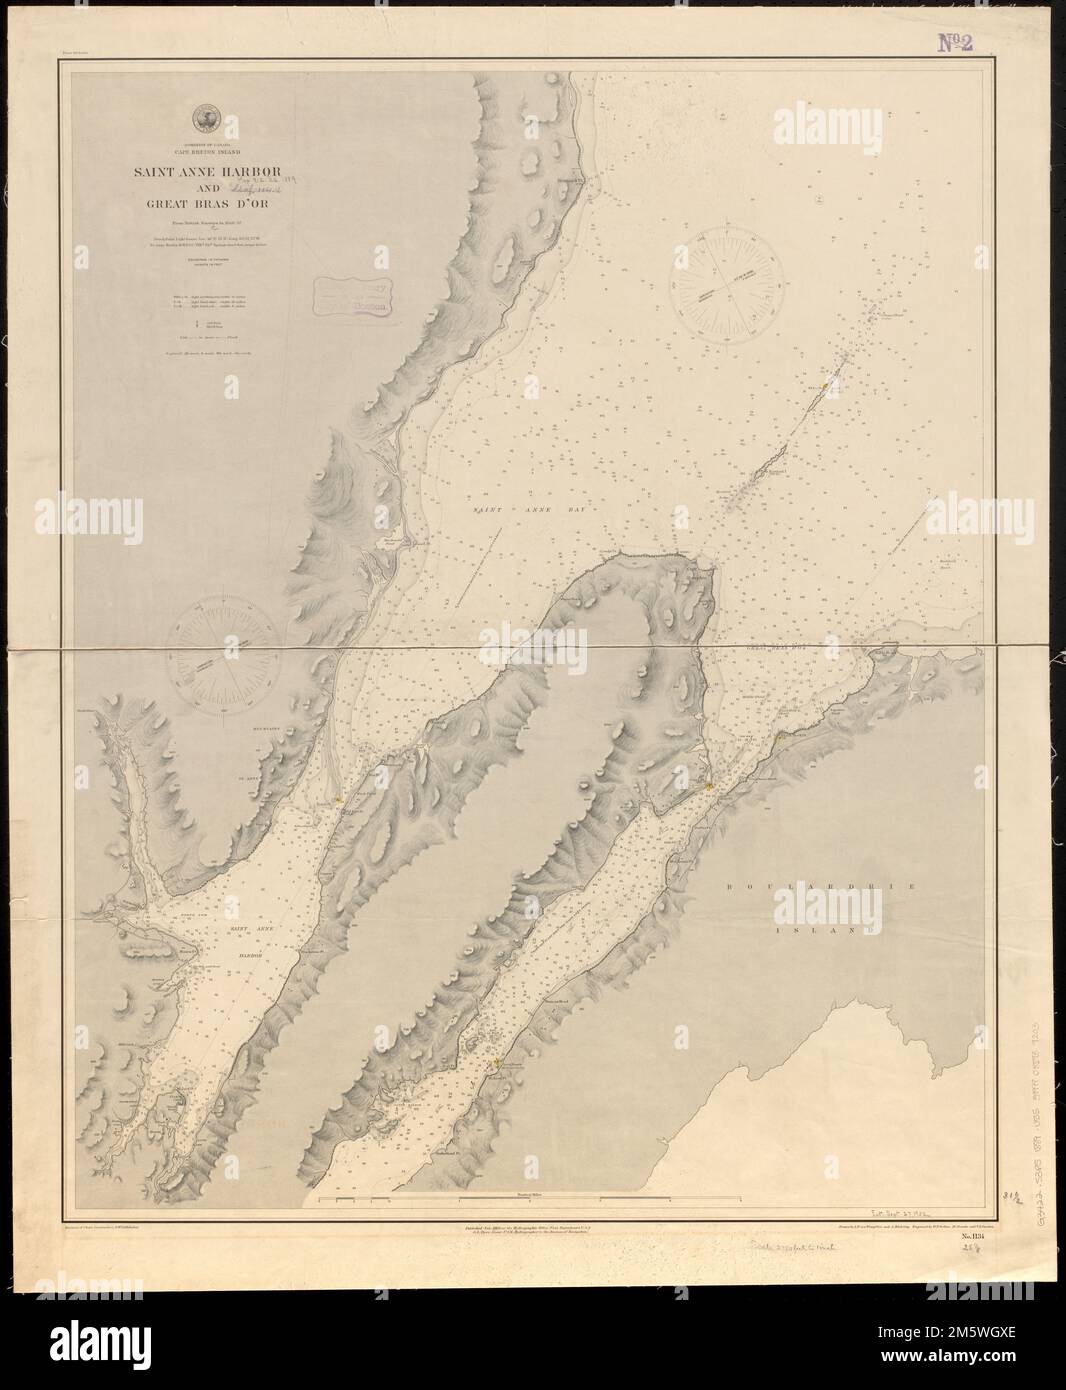 https://c8.alamy.com/comp/2M5WGXE/dominion-of-canada-cape-breton-island-saint-anne-harbor-and-great-bras-dor-from-british-surveys-in-1848-57-relief-shown-by-shading-and-spot-heights-depths-shown-by-isolines-and-soundings-saint-anne-harbor-and-great-bras-dor-saint-anne-harbor-and-great-bras-dor-canada-nova-scotia-province-saint-anns-bay-great-bras-dor-2M5WGXE.jpg